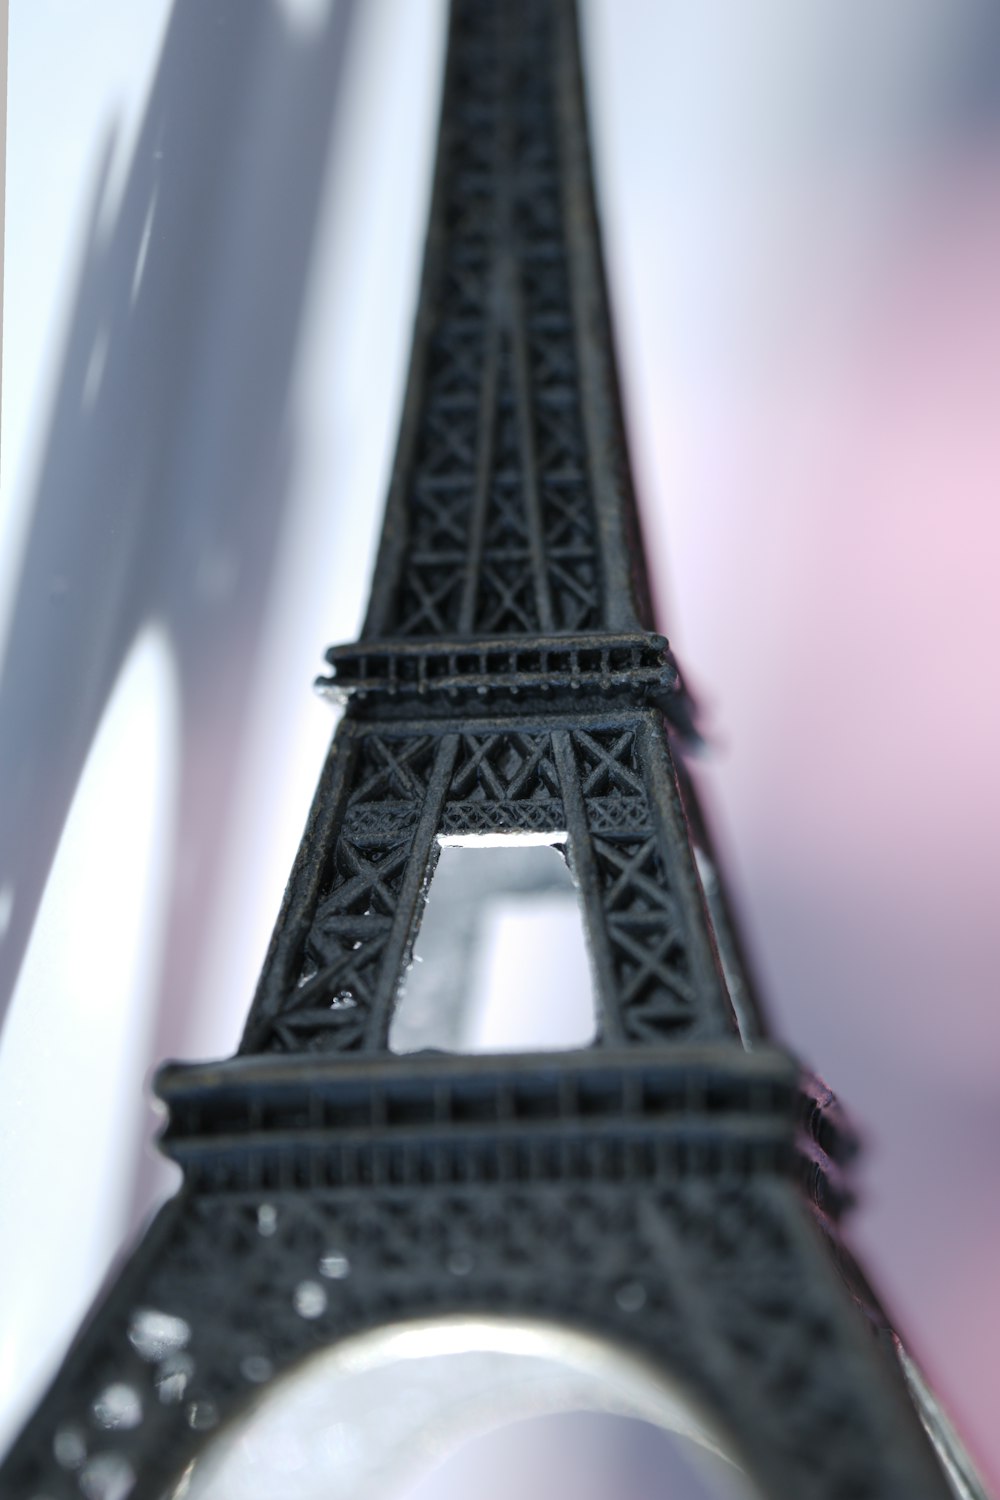 a miniature model of the eiffel tower